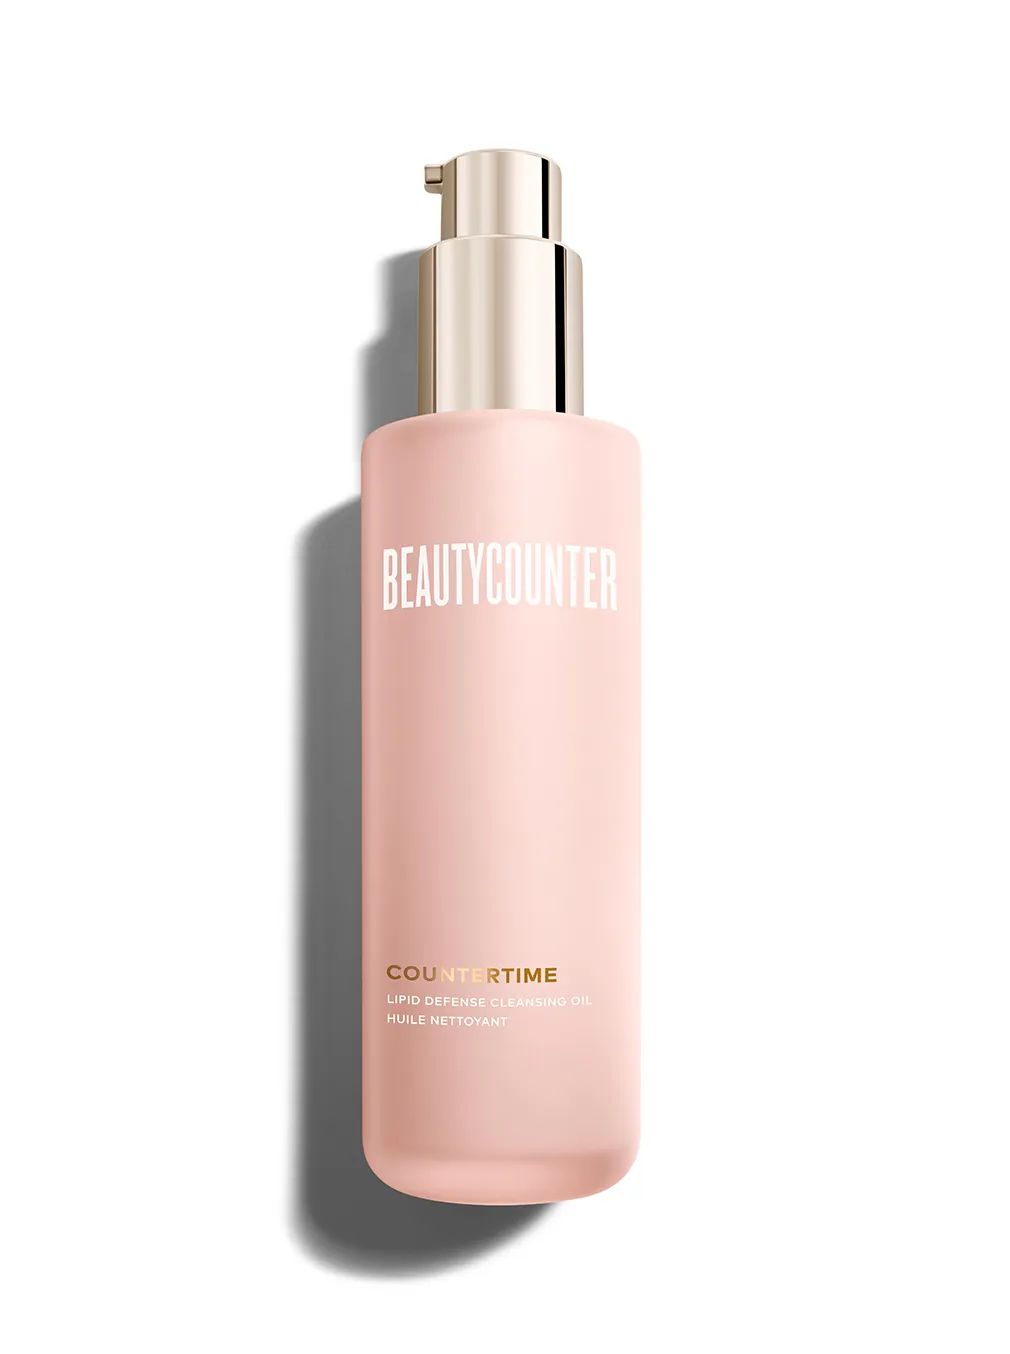 Countertime Lipid Defense Cleansing Oil - Beautycounter - Skin Care, Makeup, Bath and Body and mo... | Beautycounter.com